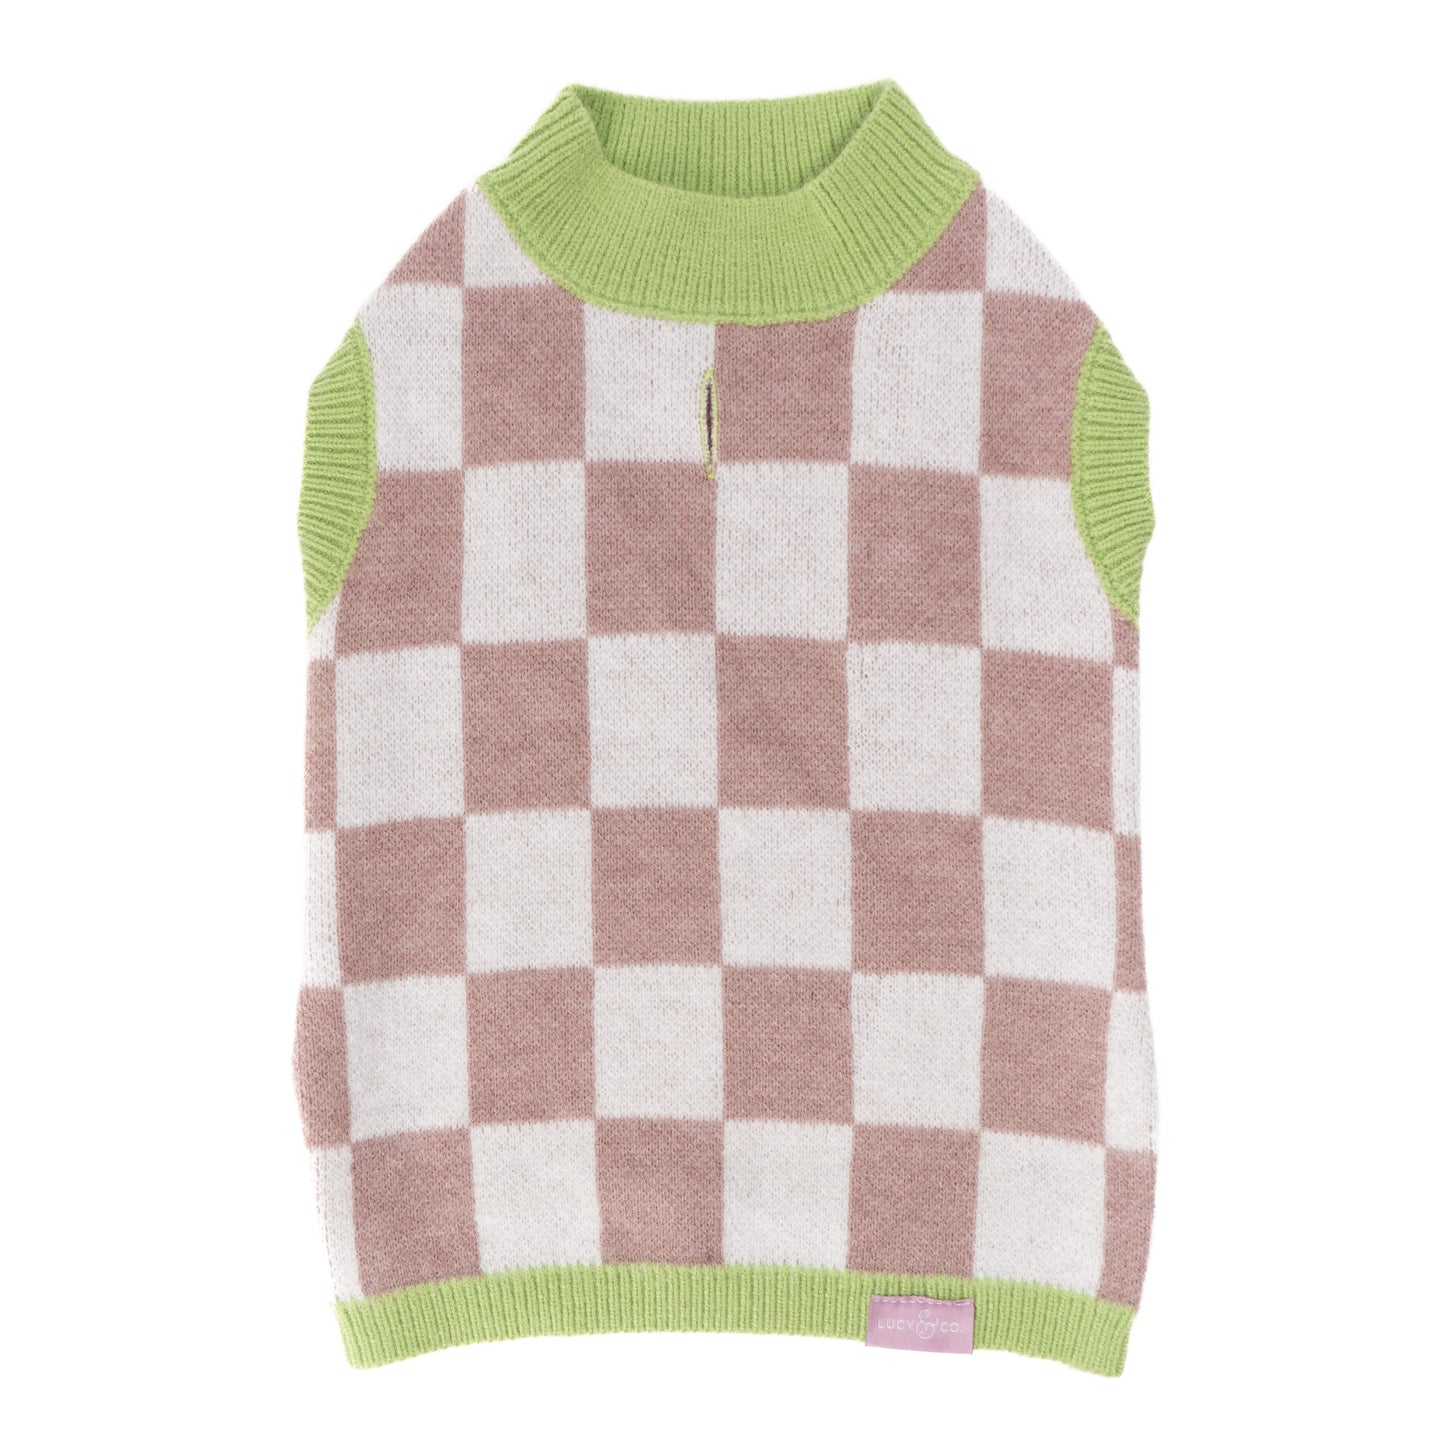 The Checked Out Sweater